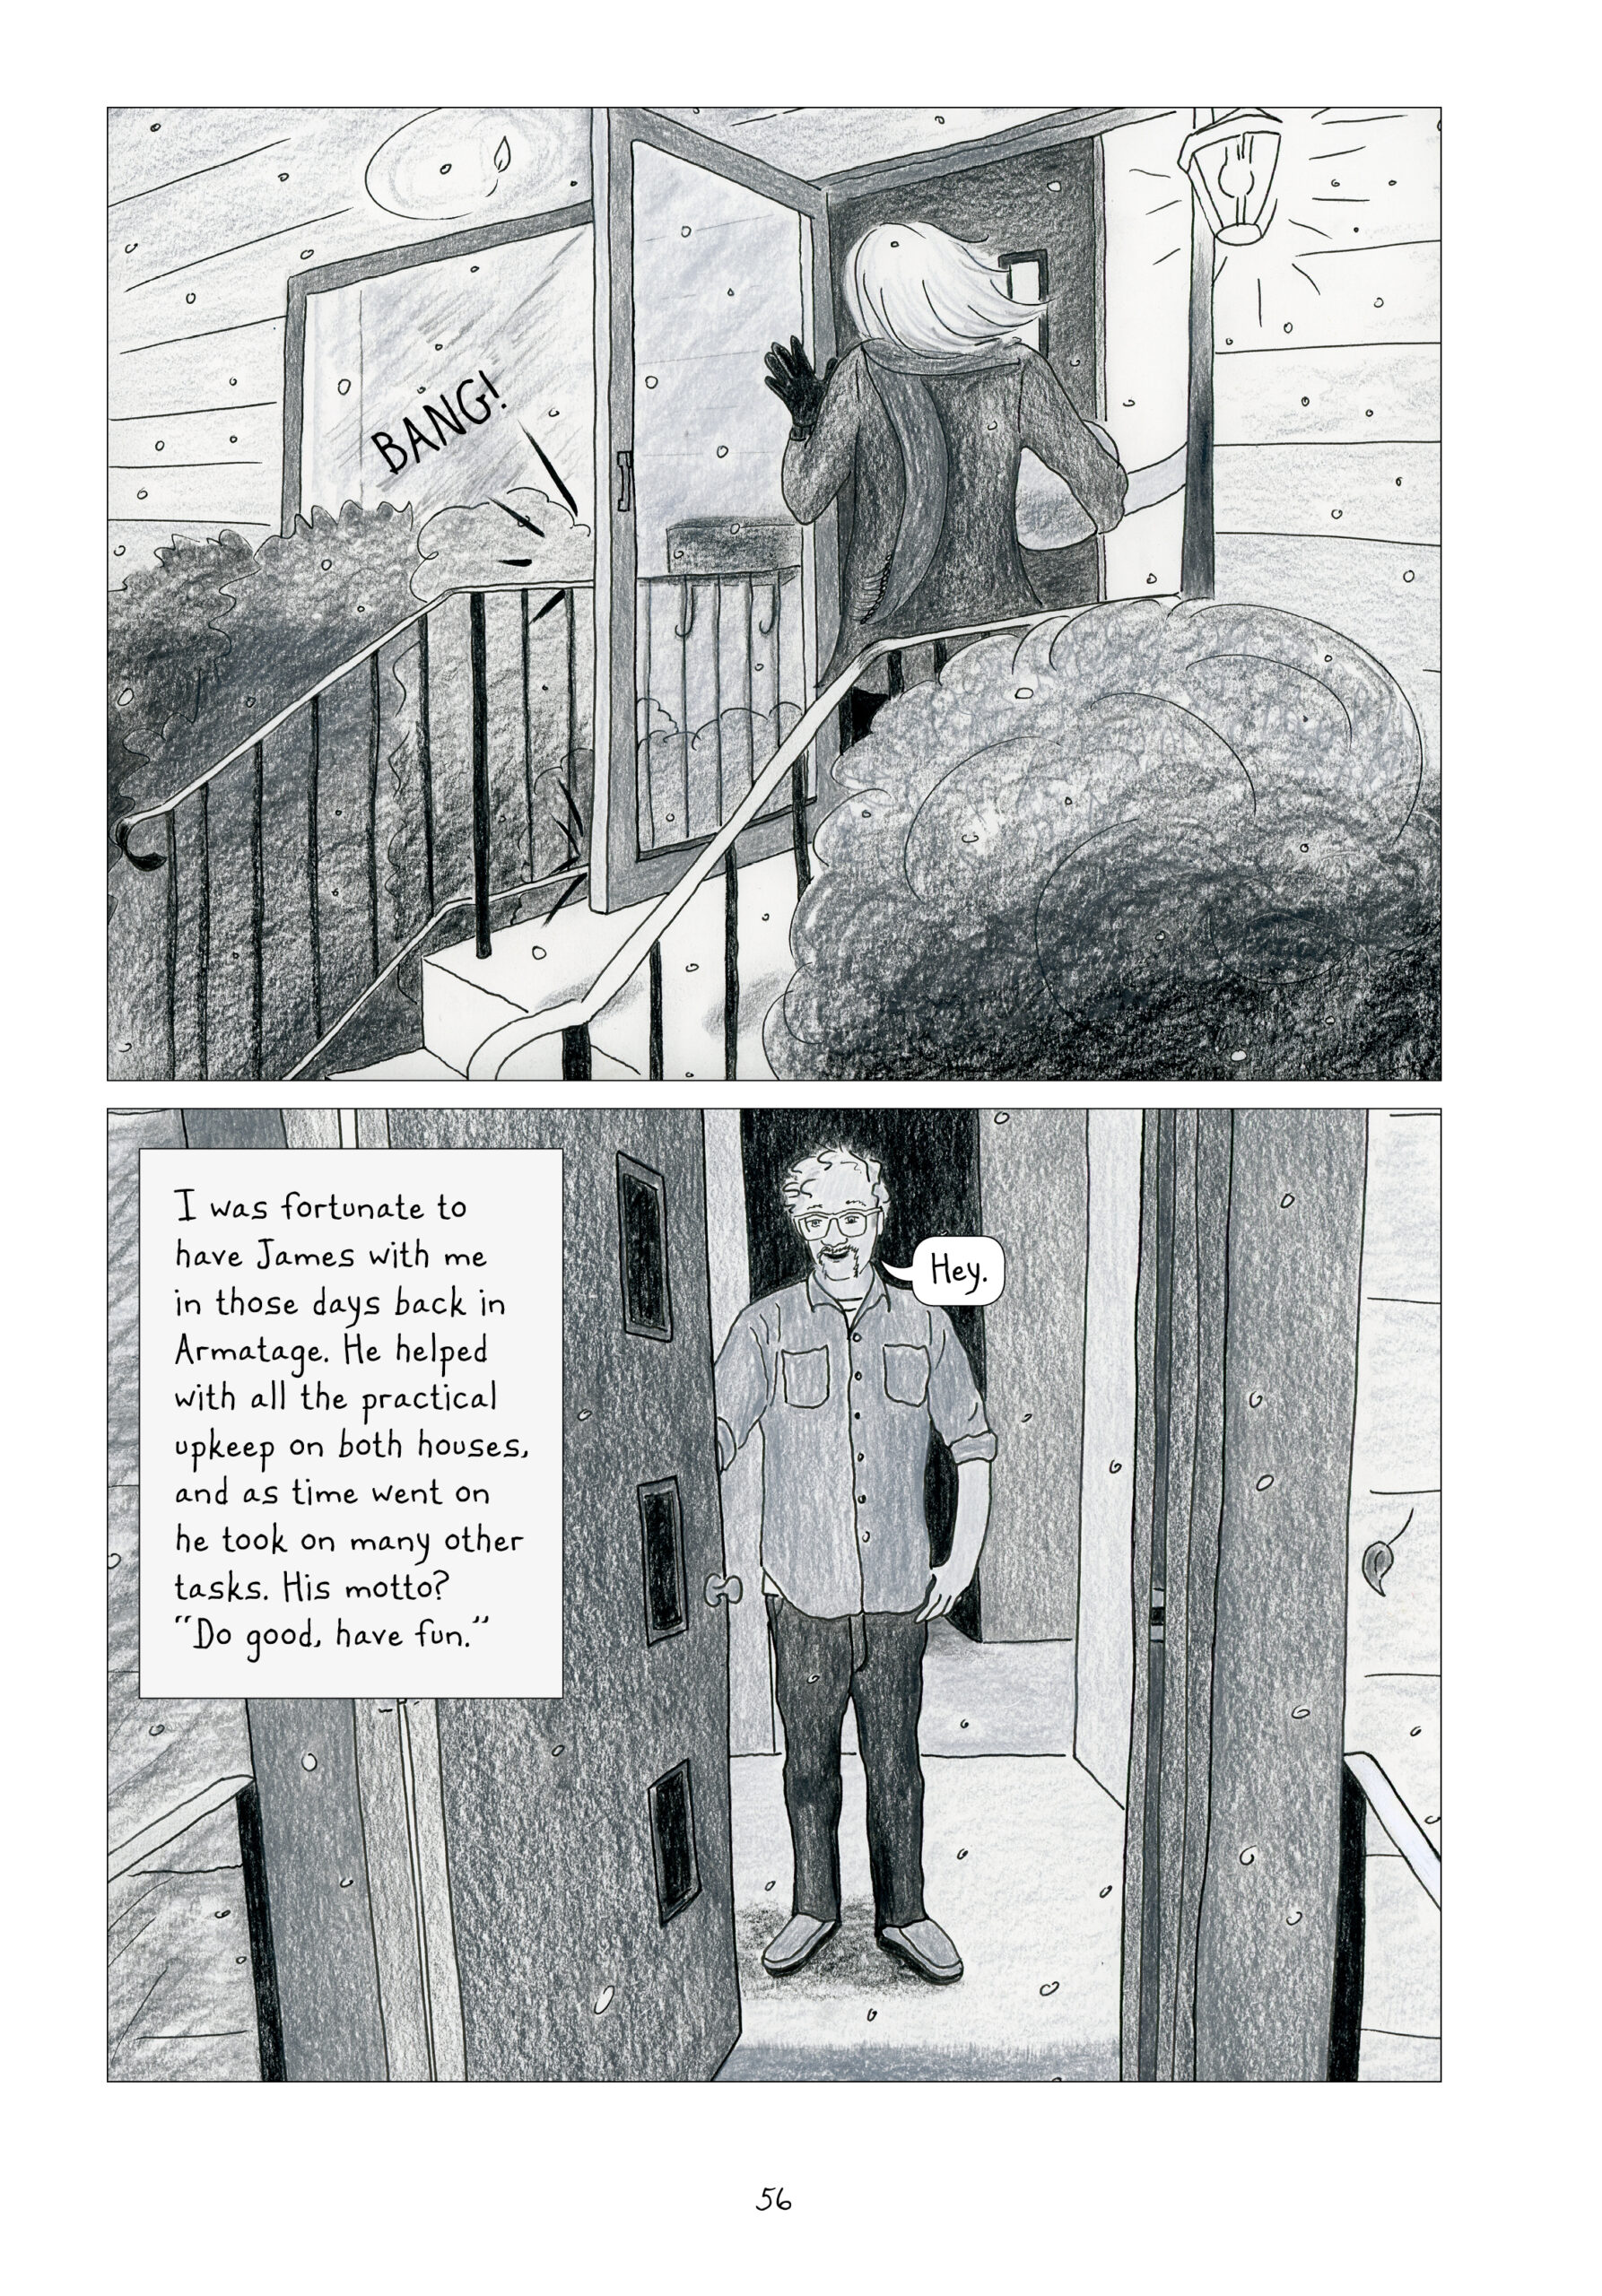 Another two panel page. Lynn knocks on the front door of someone's house: "BANG!" She is still holding the round object, now with one arm. The porch light is on. There is a set of stairs with rails leading up to the front door. Bushes sit on both sides of the little porch. Snow is suspended in the air. 

A man answers the door: "Hey." He has short, wavy hair with a receding hairline, and a scruffy mustache in a fu manchu shape (extending down to his chin). He wears glasses, and a smile. He wears dark jeans, moccasins, and a collared button down shirt with breast pockets and the sleeves rolled up to his elbows. The man stands in the doorway inside.

Lynn narrates, "I was fortunate to have James with me in those days back in Armatage. He helped with all the practical upkeep on both houses, and as time went on he took on many other tasks. His motto? 'Do good, have fun.'"